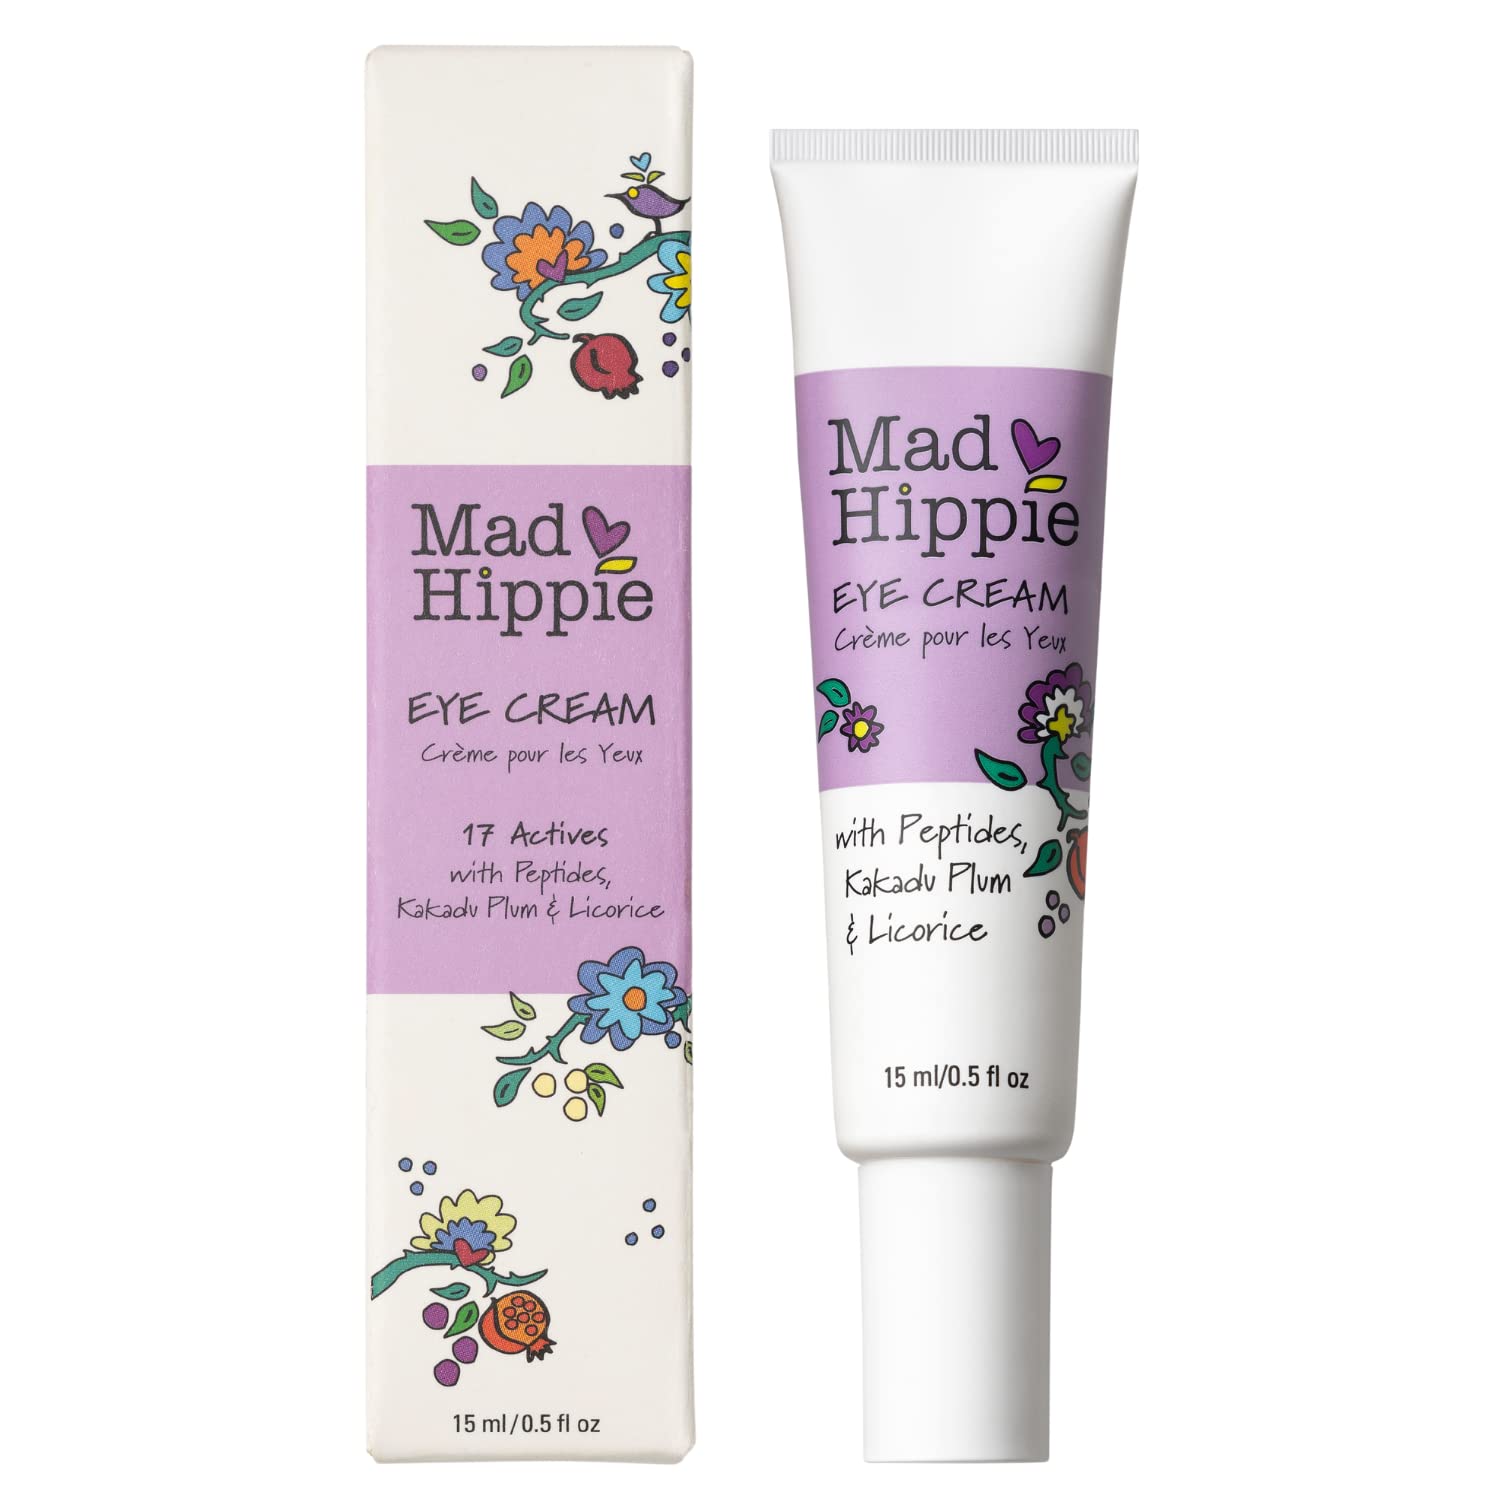 Mad Hippie Eye Cream - Anti-Aging Under Eye Cream for Dark Circles and Puffiness with Niacinamide, with Skin-Brightening Vitamin C, 0.5 Oz